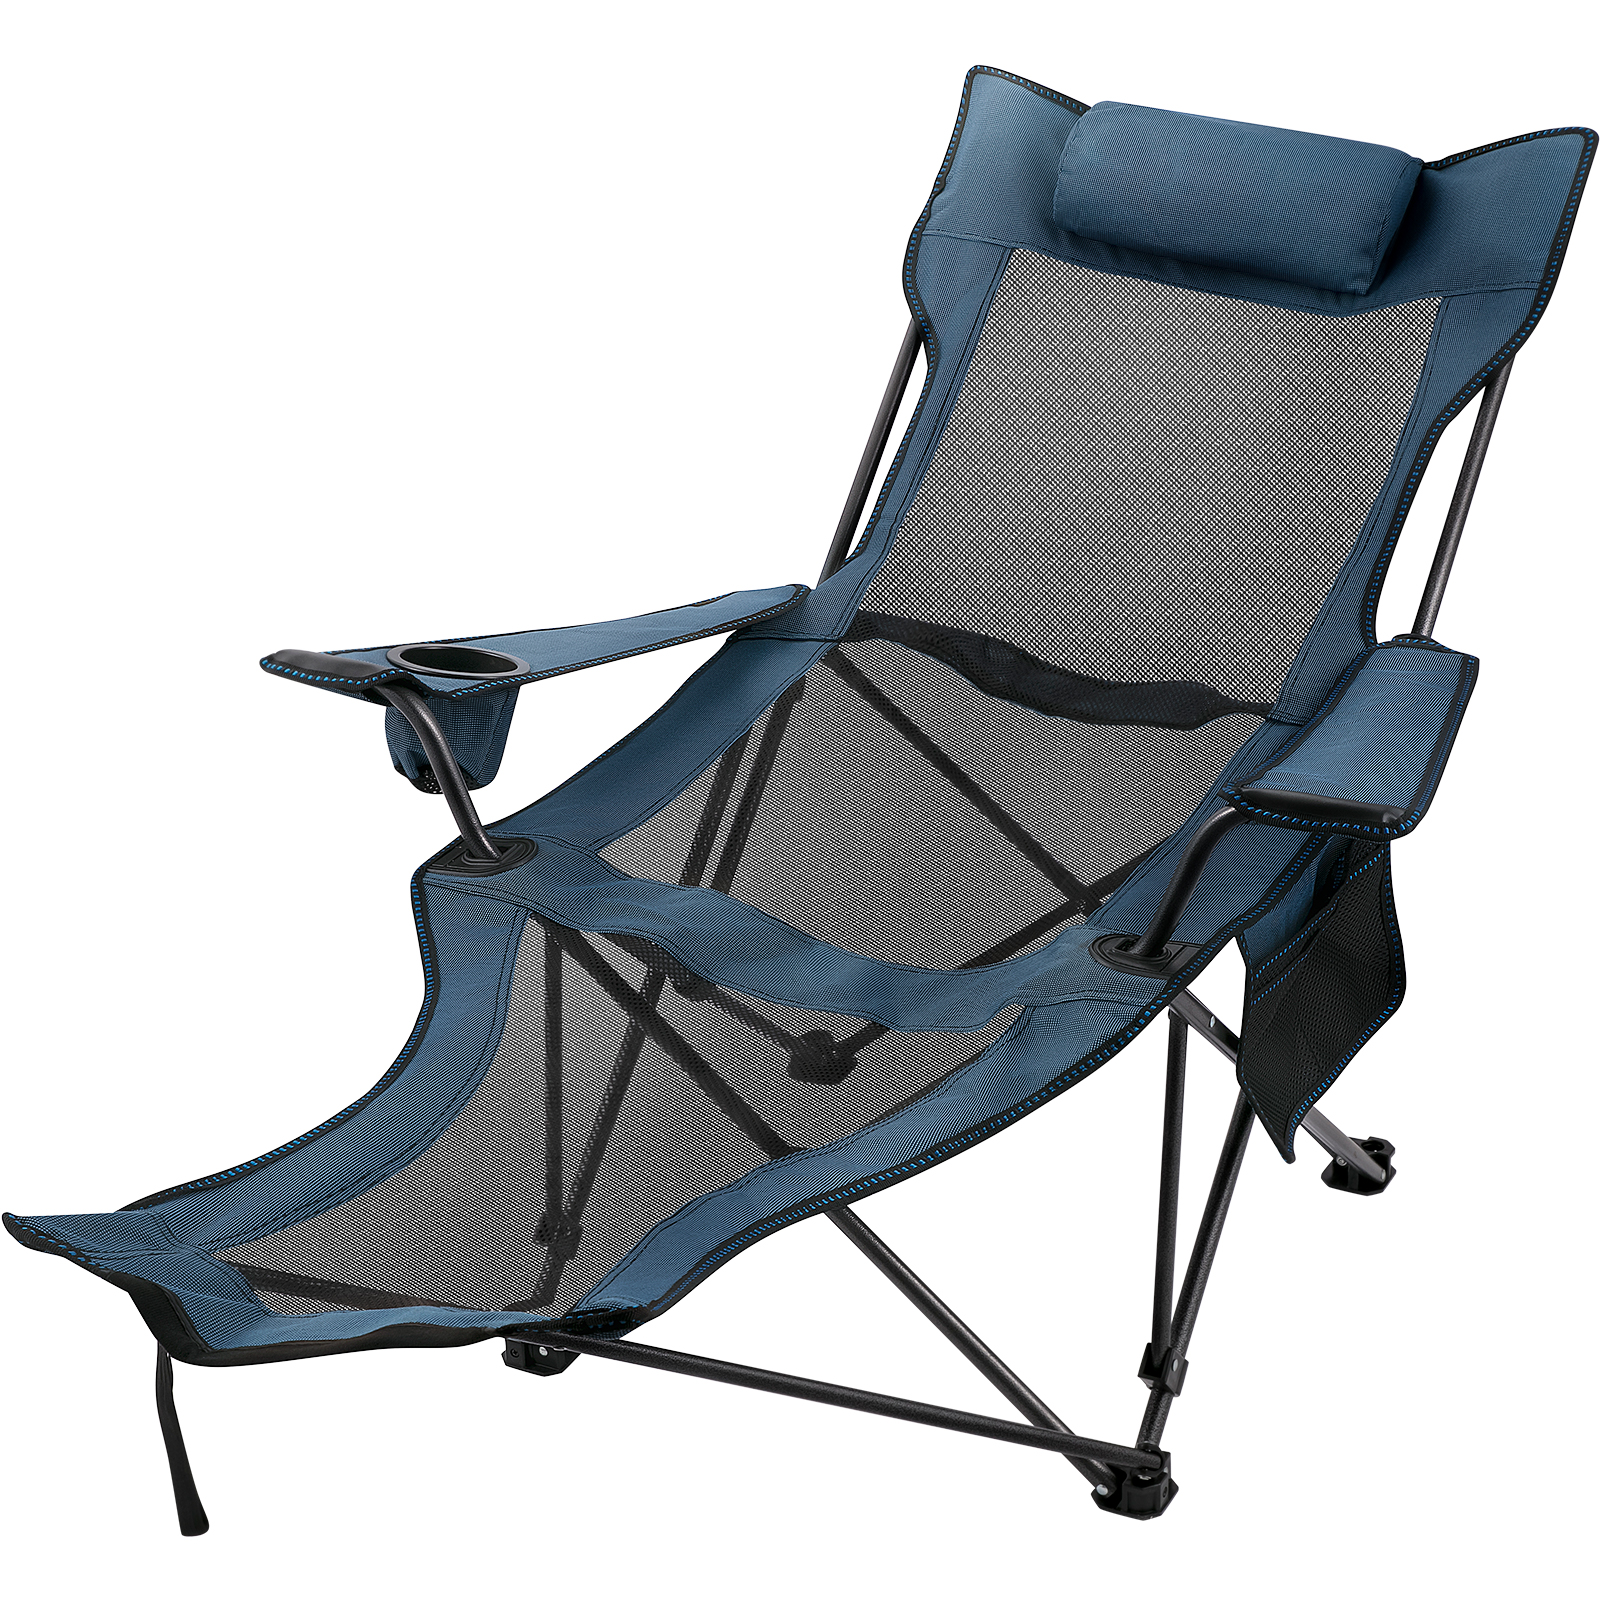 Color : Blue Blue Beach Folding Lounge Chair with Pillow Adult Outdoor Camping Patio Heavy Duty Portable Lawn Chairs Oxford Cloth,150kg Metal 